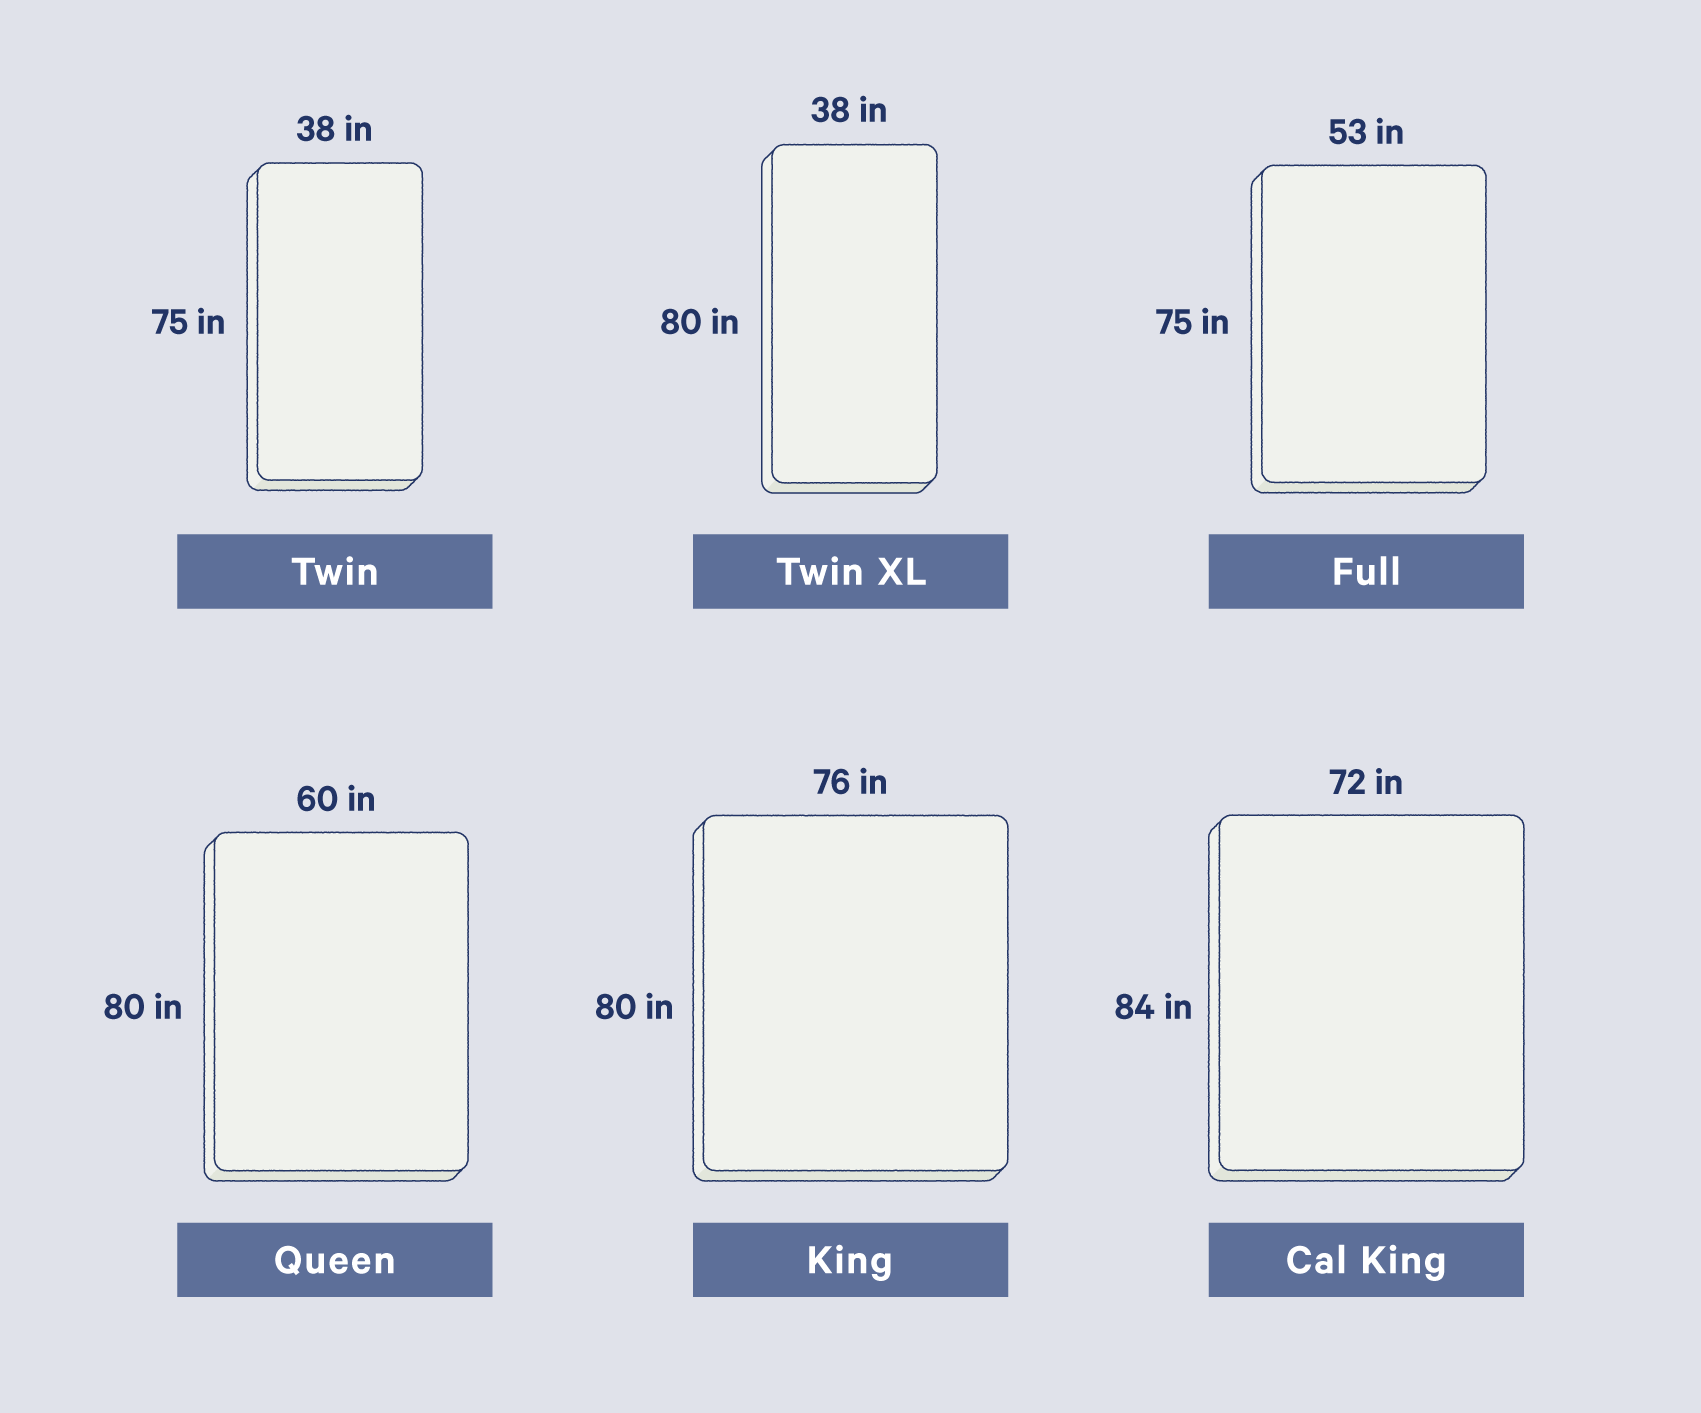 Comparison Of A Twin Xl Mattress To Other Mattresses